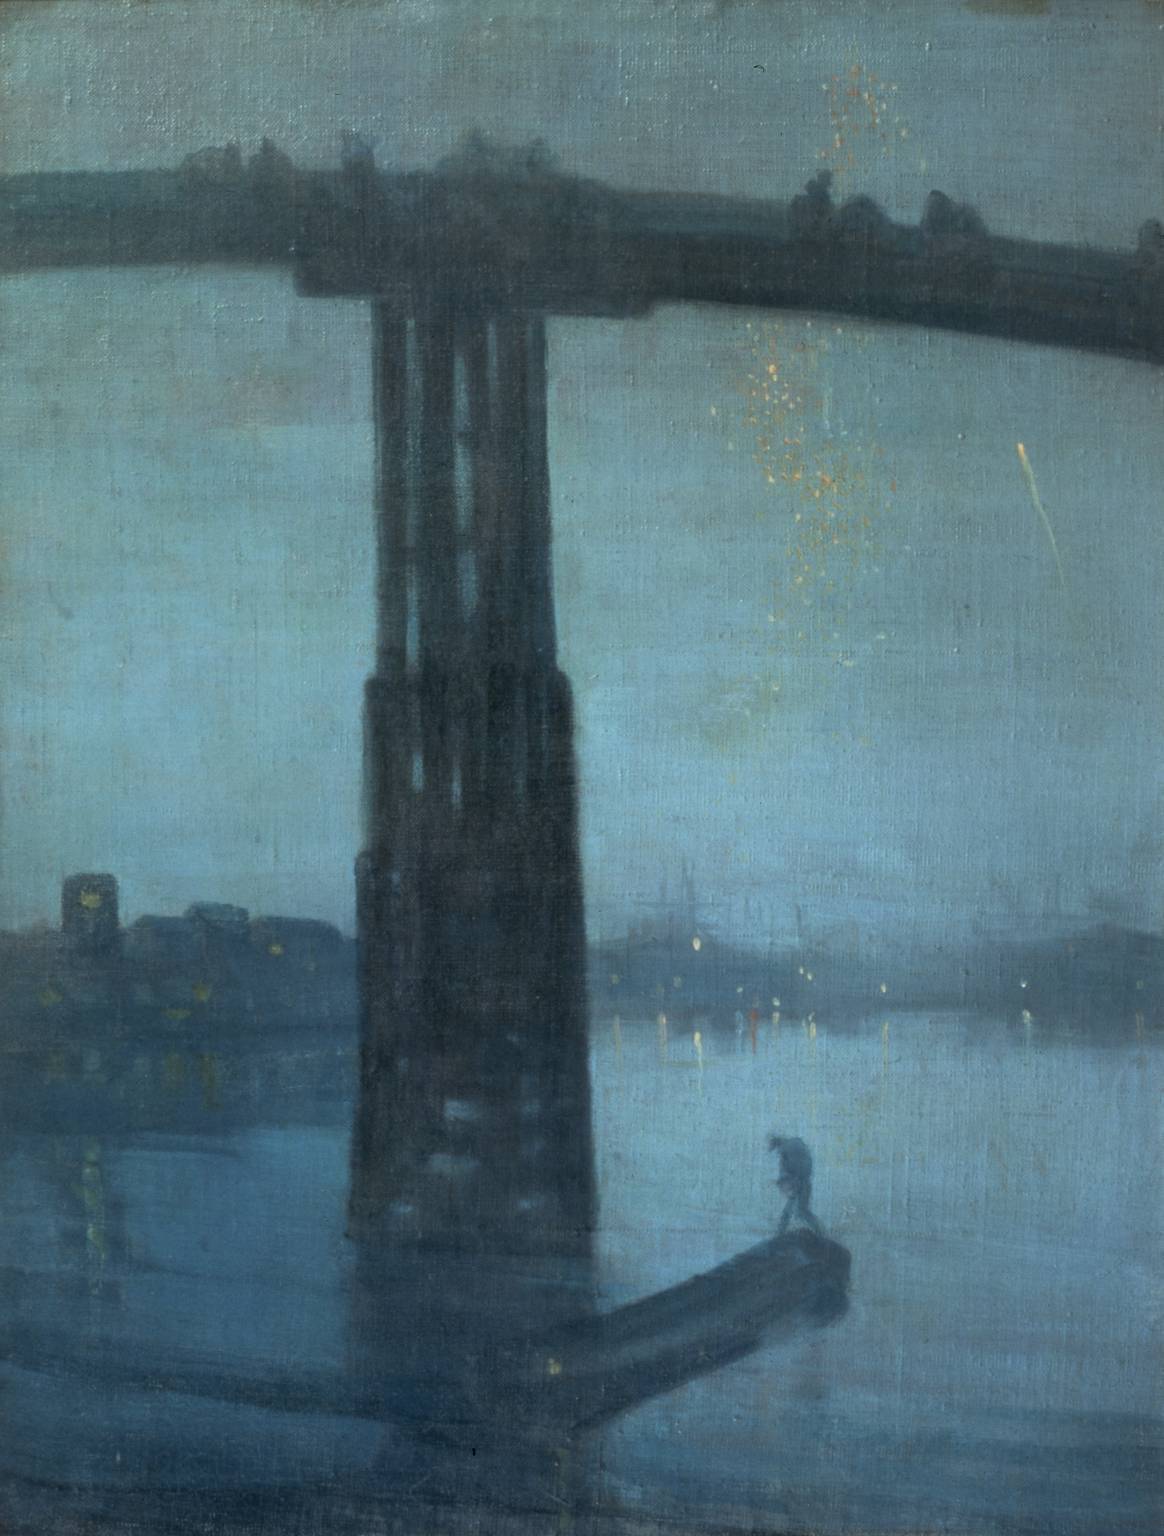 Nocturne: Blue and Gold - Old Battersea Bridge (1872-5) by James Abbott McNeill Whistler
found at: www.tate.org.uk/art/artworks/whistler-nocturne-blue-and-gold-old-battersea-bridge-n01959/text-summary
medium: Oil paints on canvas
I find this piece interesting because light is very important to it, and tone helps to bring the scene to life and make it seem tranquil 